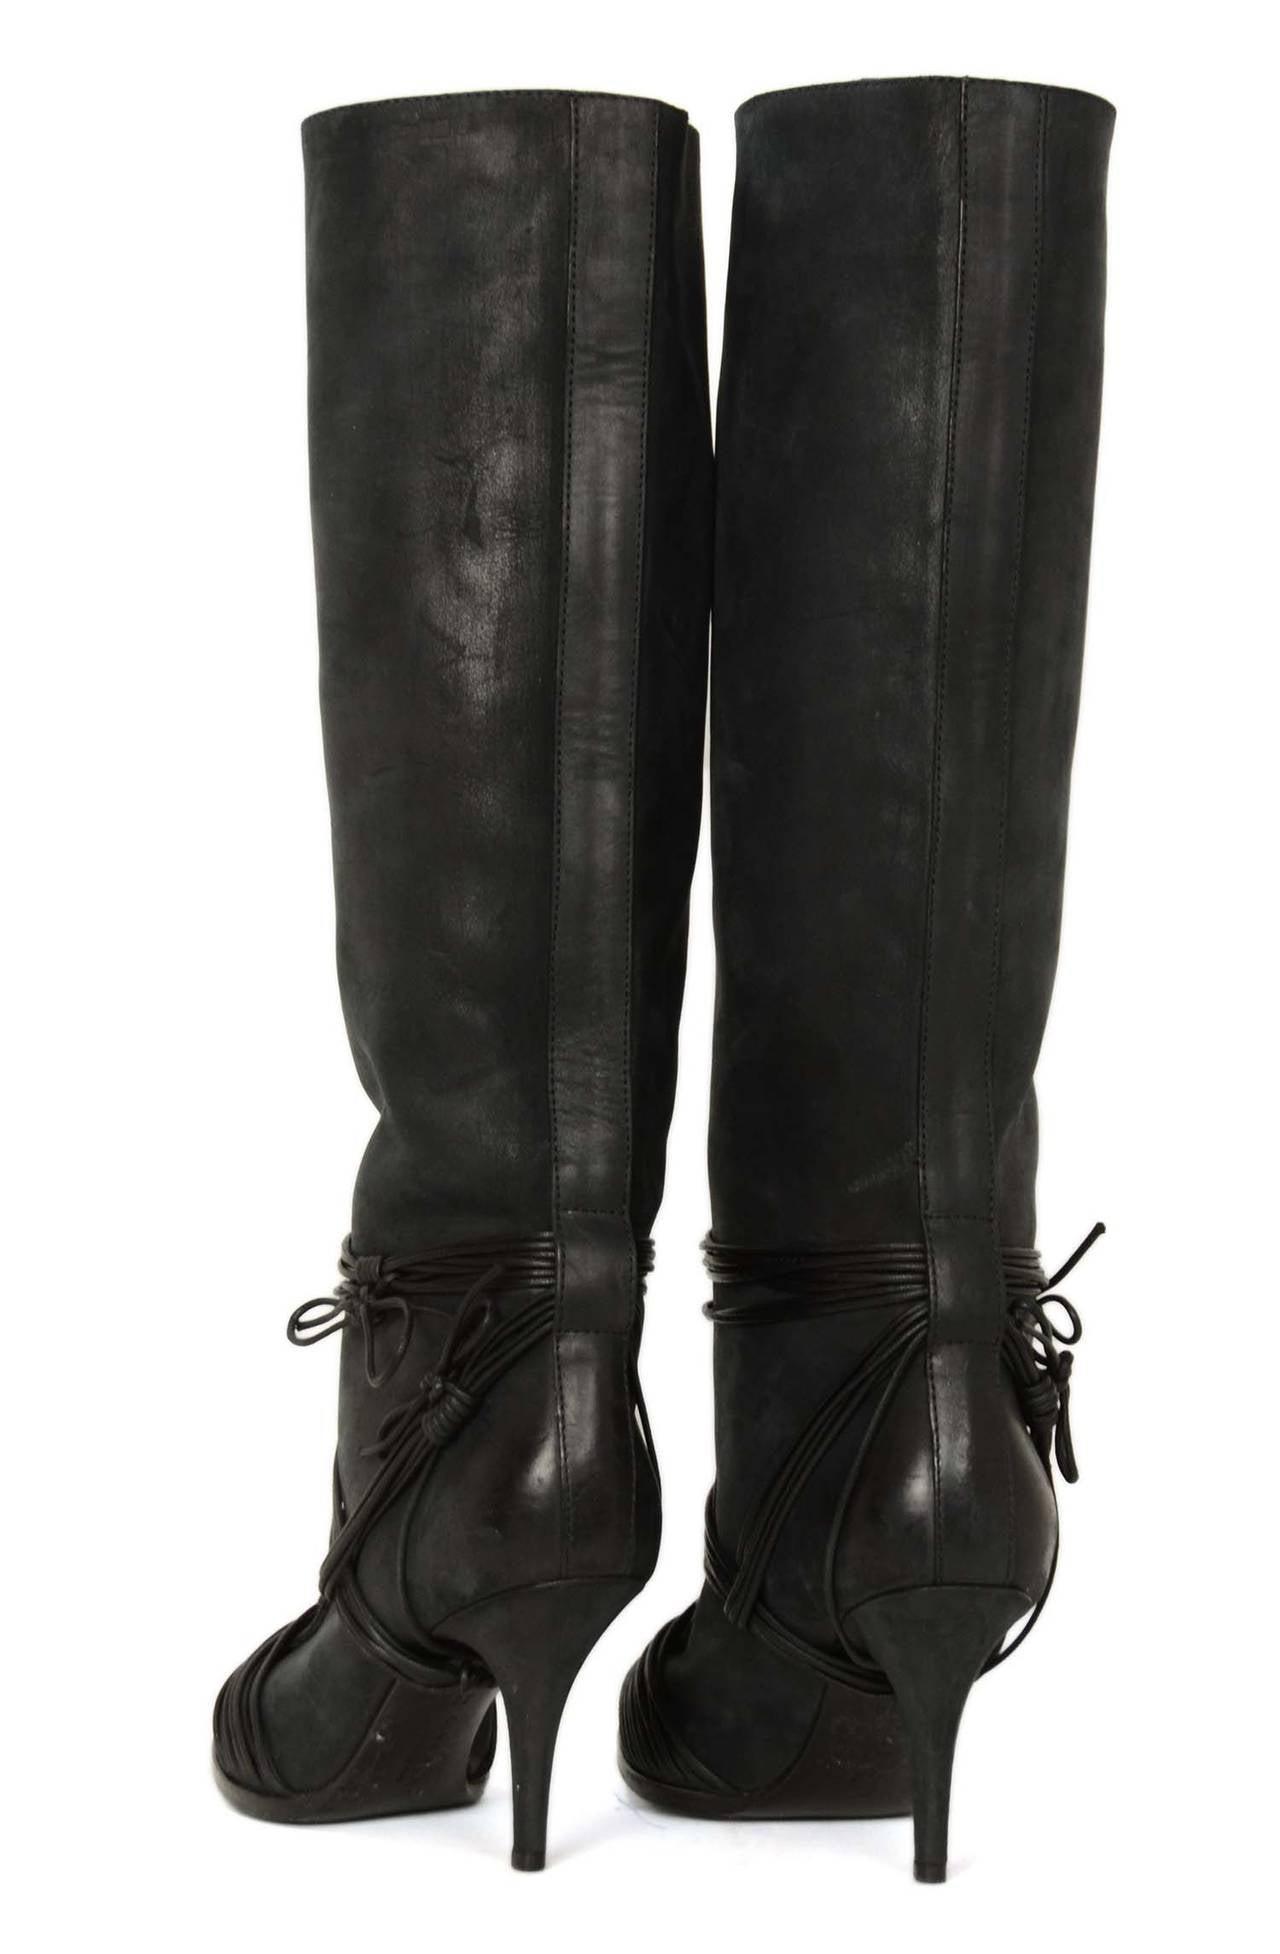 Women's GIVENCHY Black Distressed Suede Tall Boots w/ Laced Detail sz 39.5 rt. $1, 290